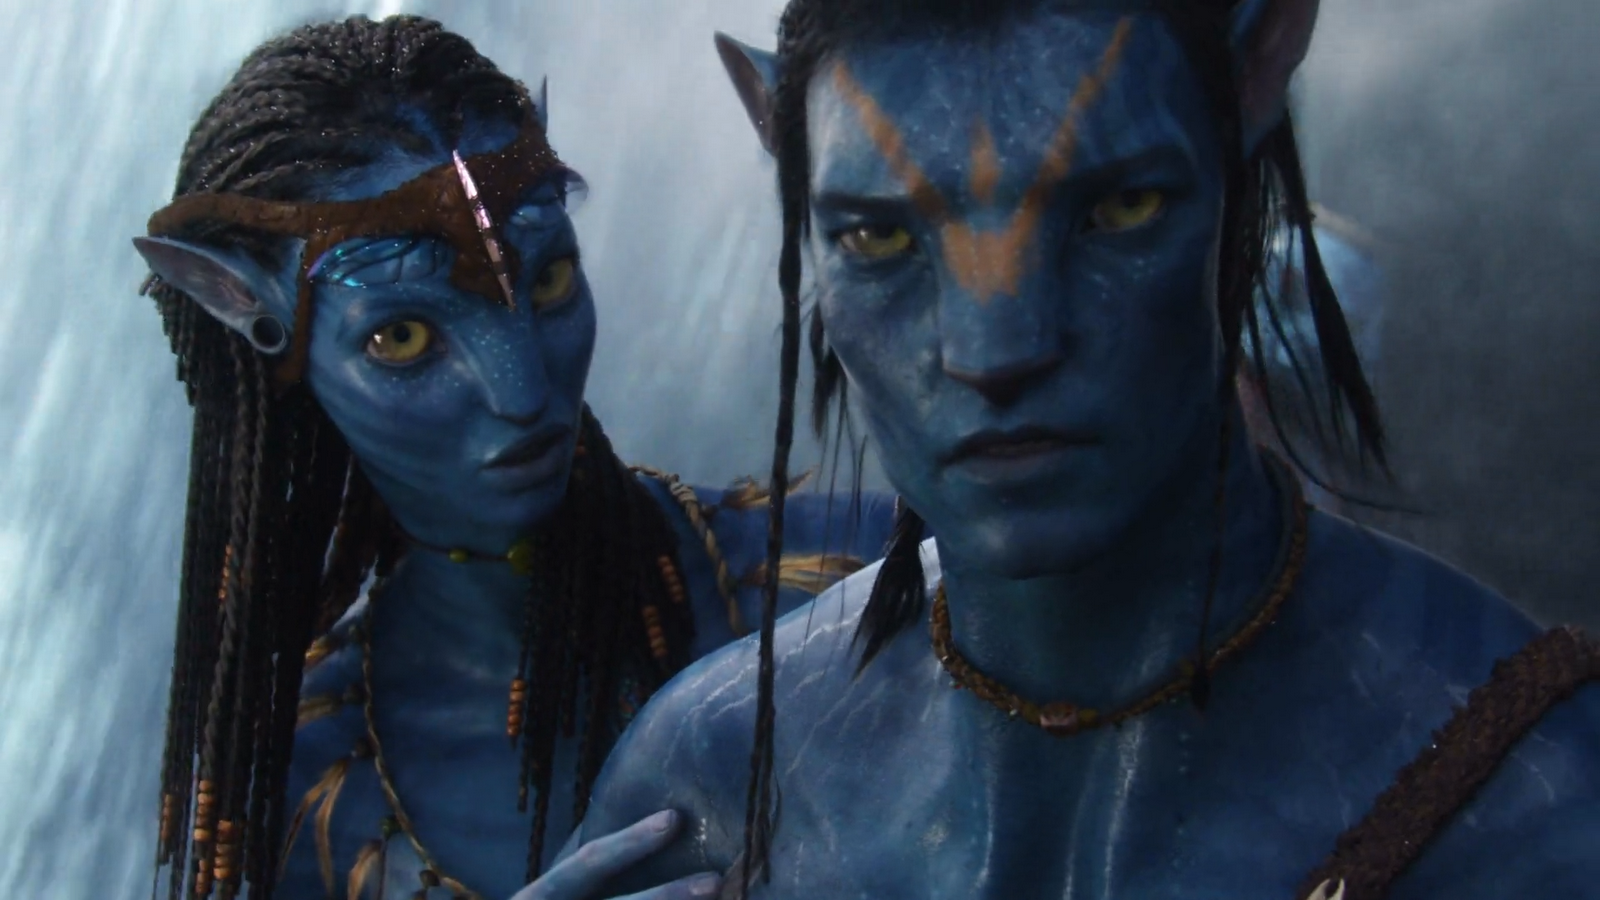 Avatar Extended Collectors Edition 2009 1080p BDRip x264 AAC - HoncHo ...